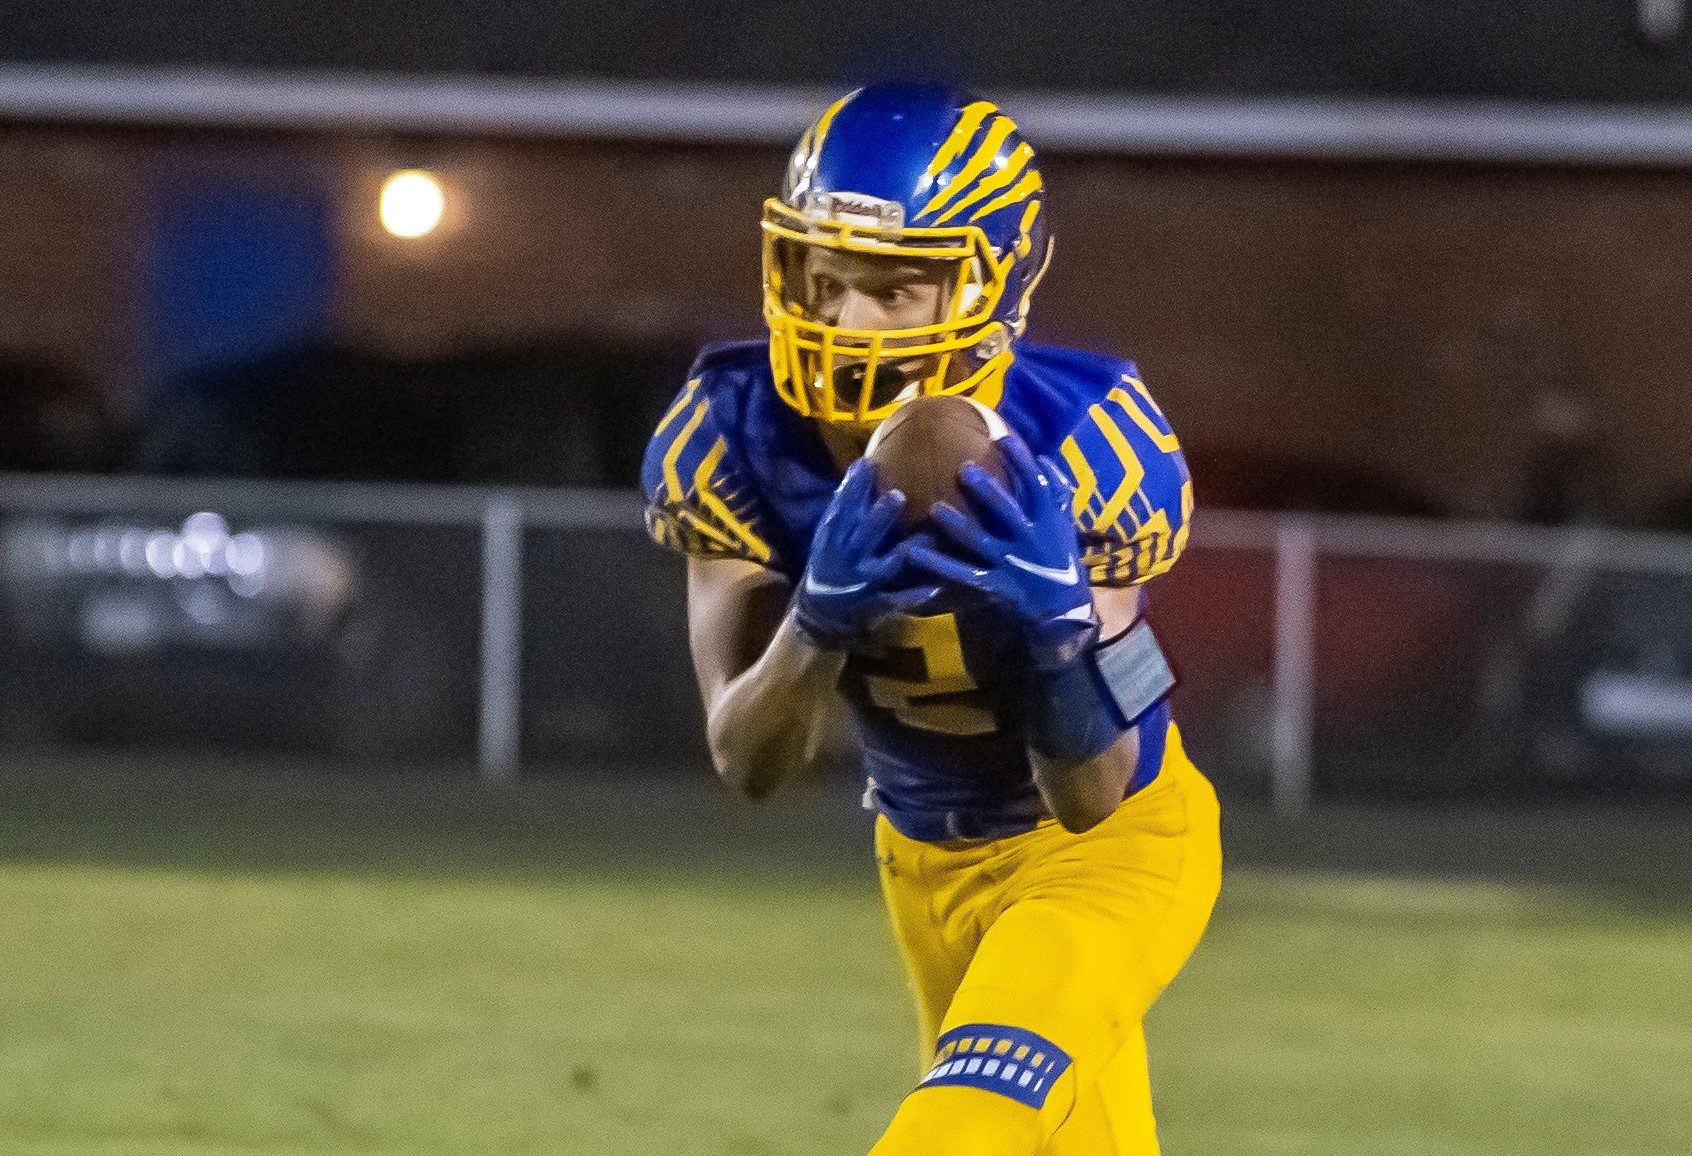 Catch him if you can: Southwestern Randolph’s Cole off to blazing start